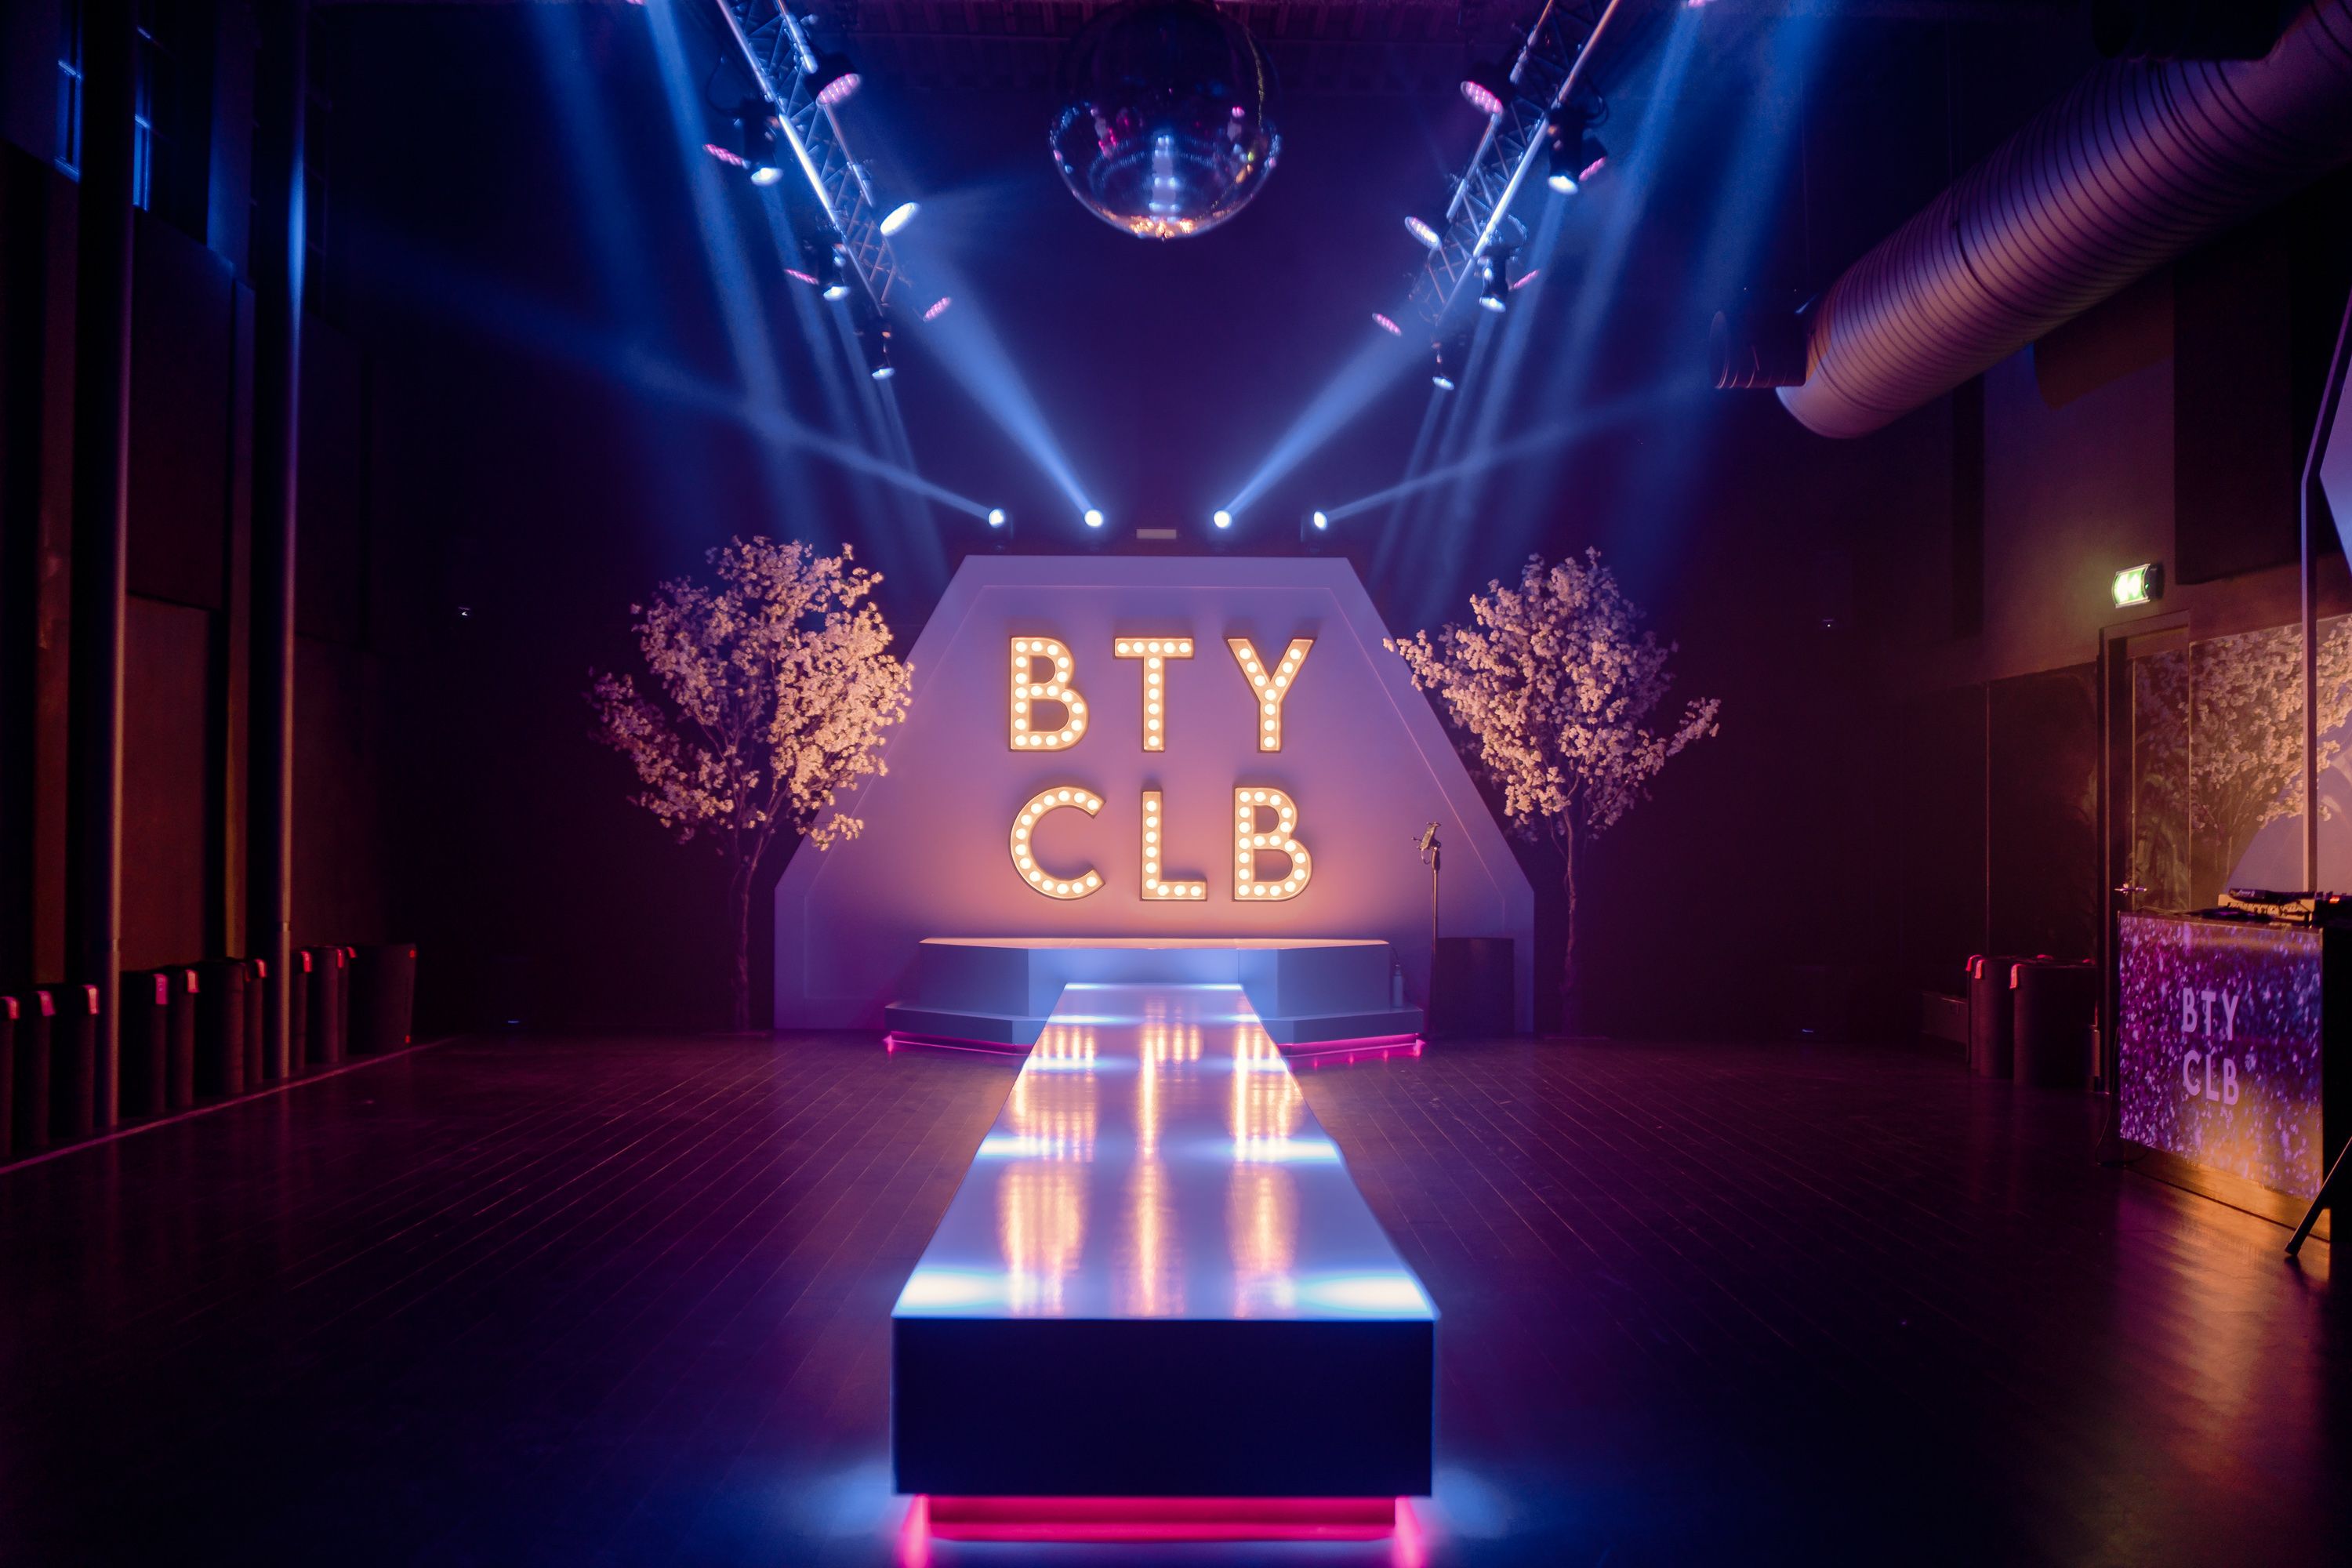 BTY CLB - image 1